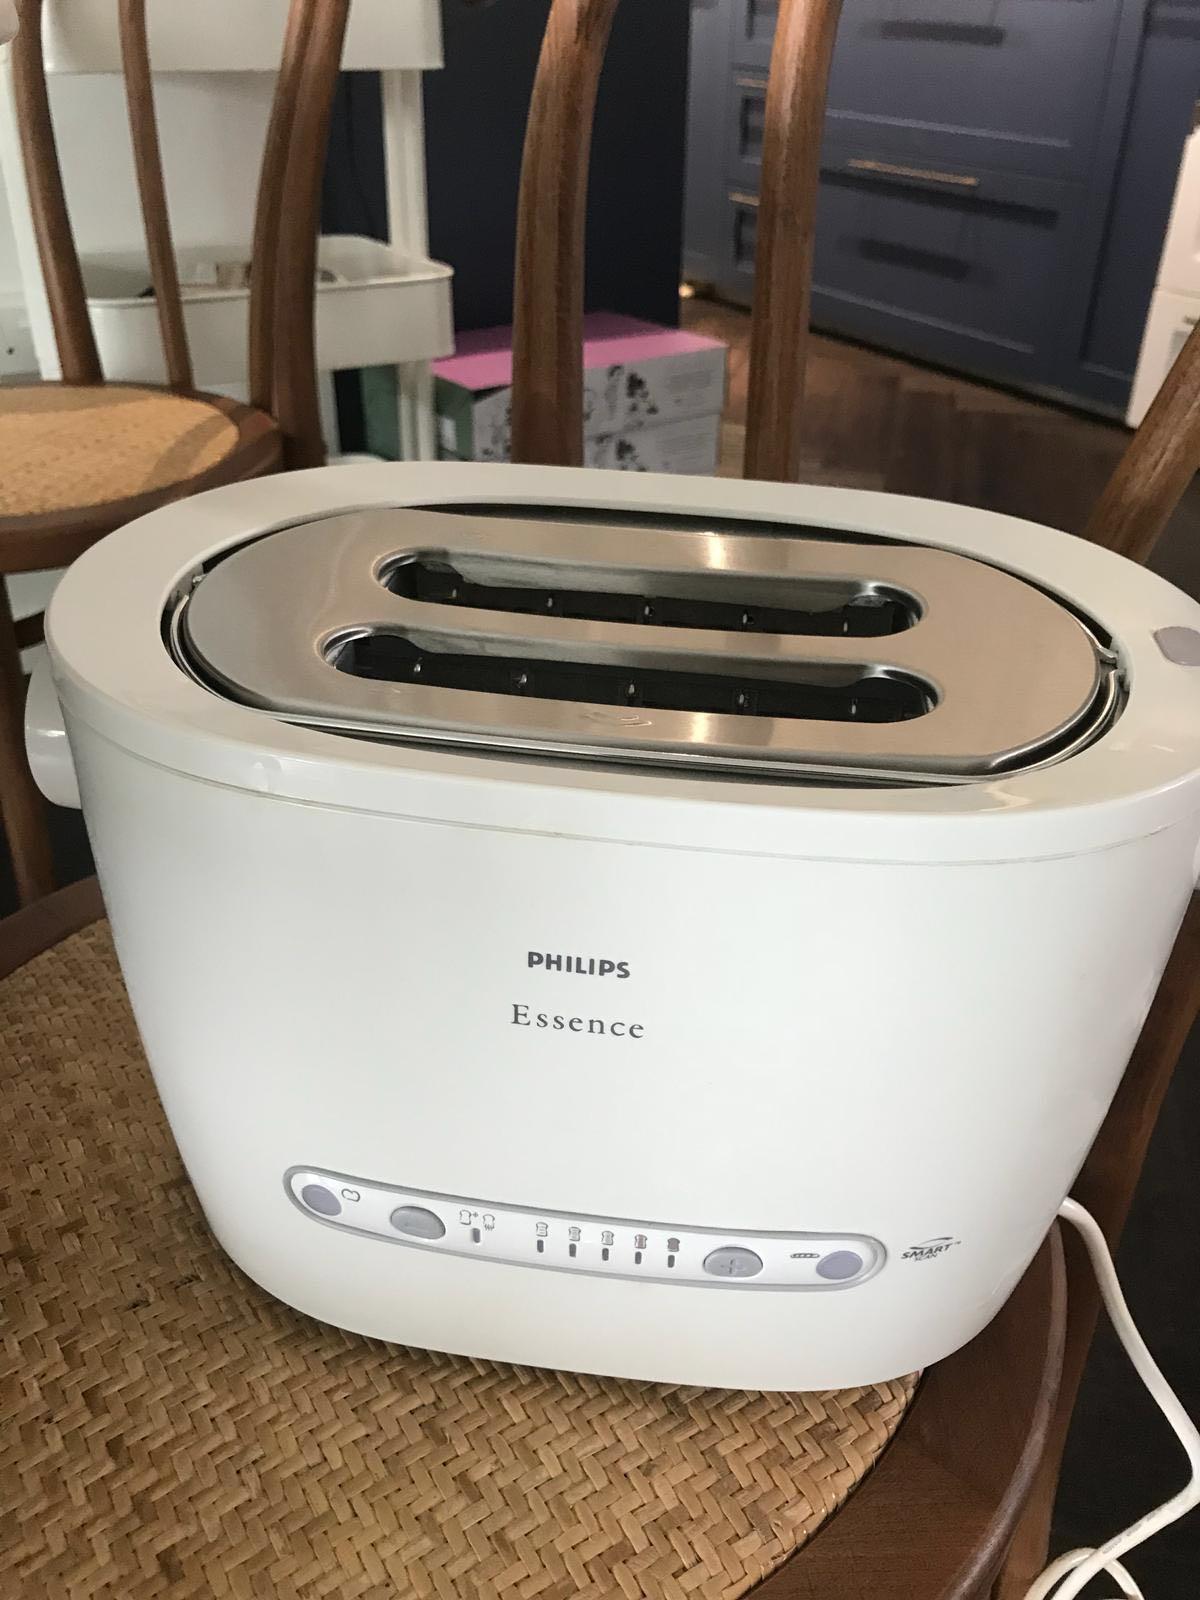 Philips Toaster (Brand new in box), Furniture & Home Living, Cleaning & Supplies, Ironing Boards on Carousell